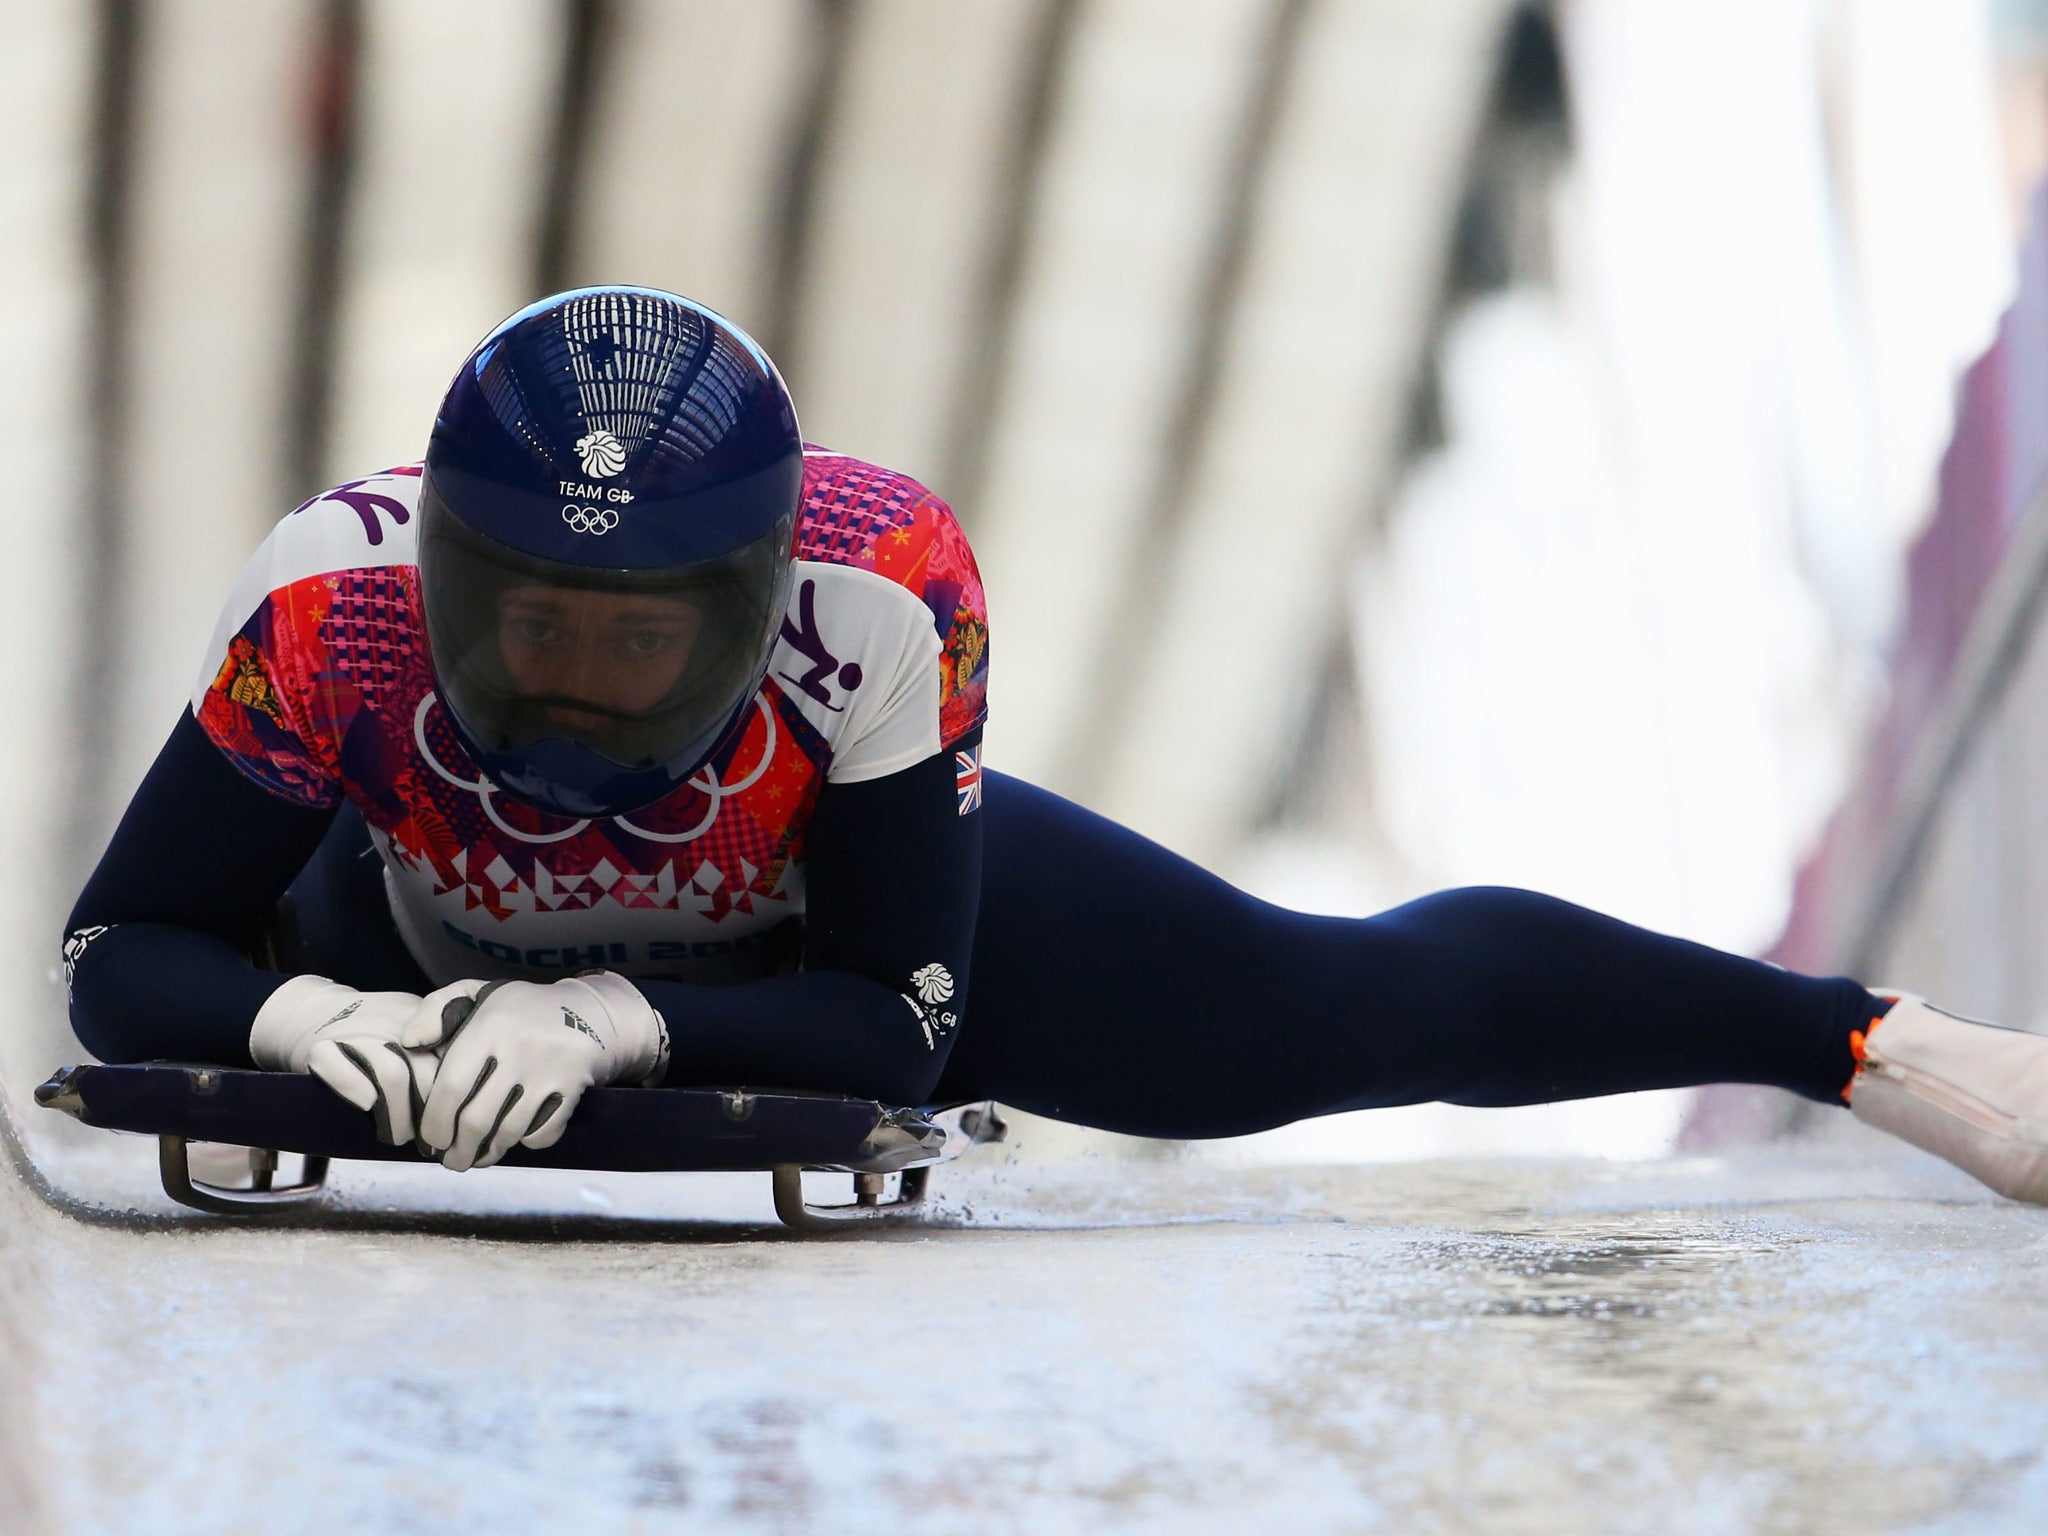 Lizzy Yarnold goes on her first run in the skeleton